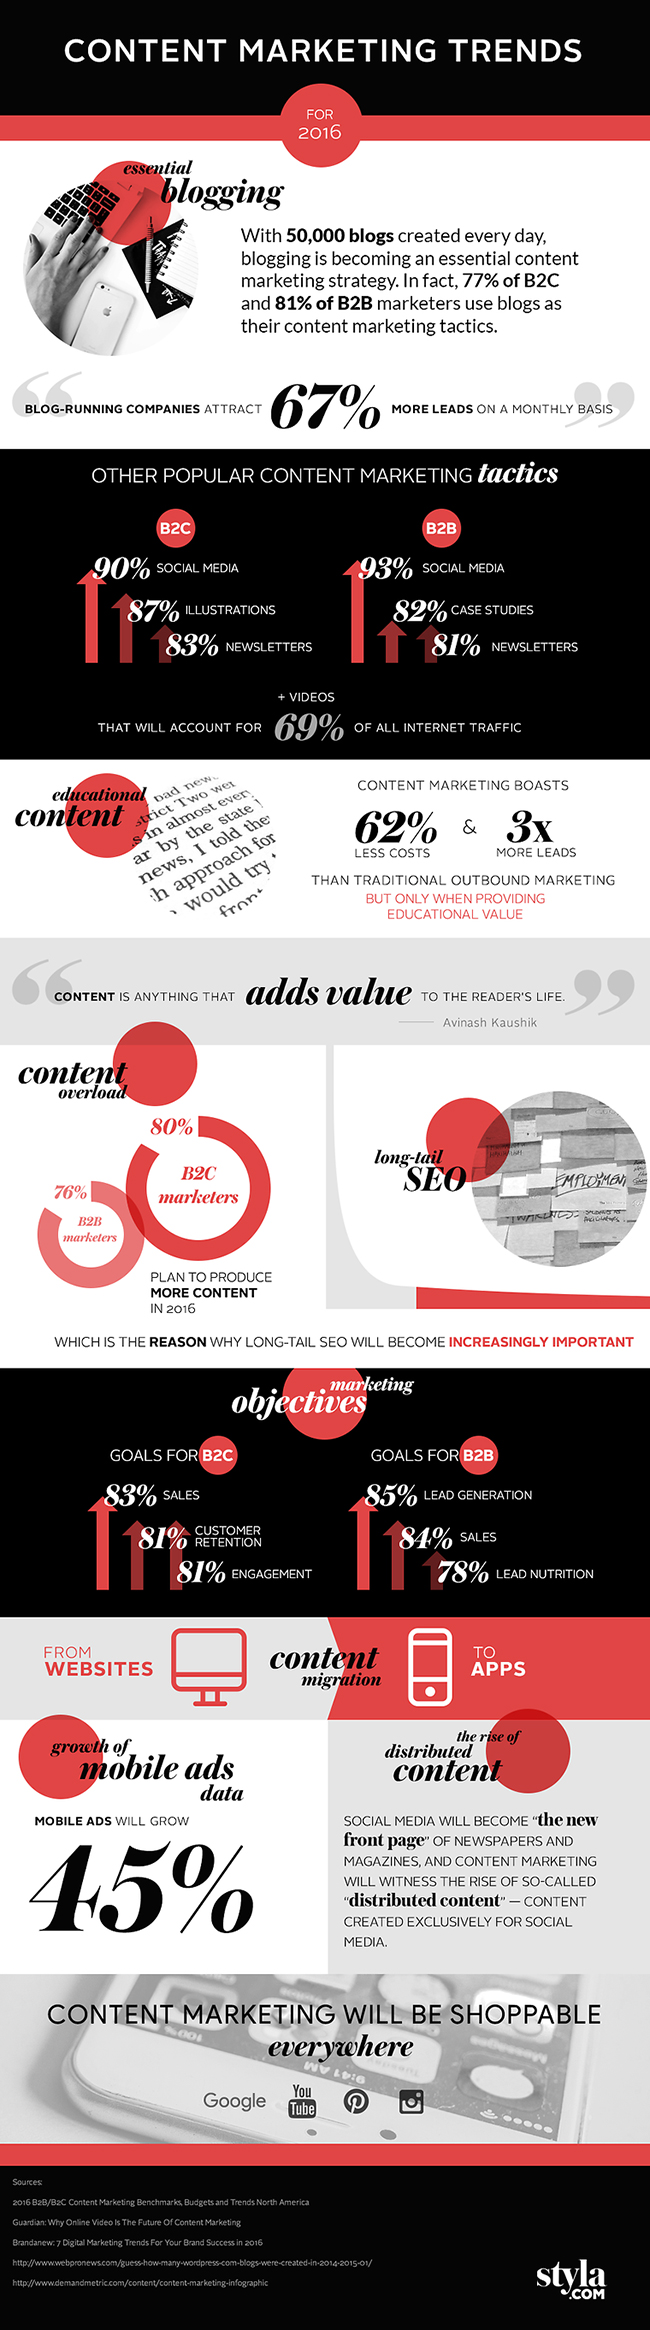 content-marketing-trends-for-2016-infographic